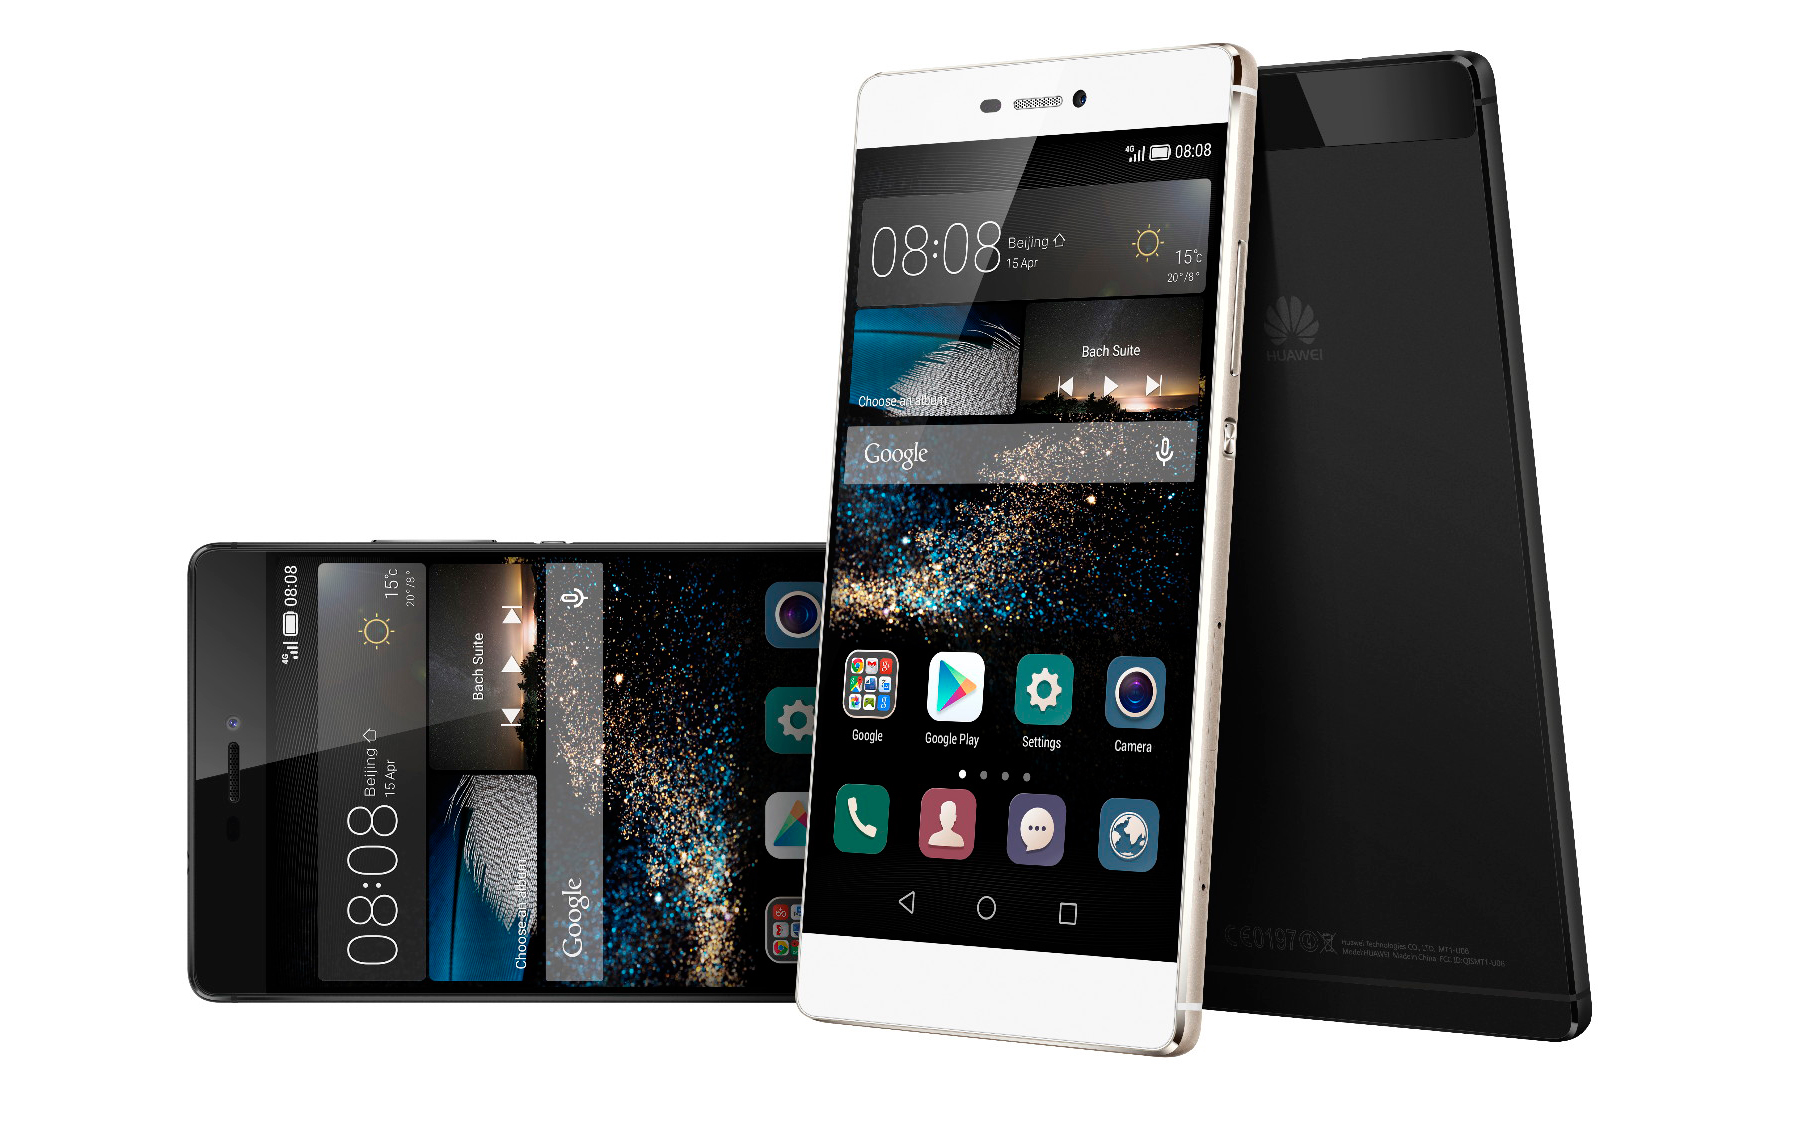 Huawei P8 Lite si aggiorna ad Android 6.0 Marshmallow ...